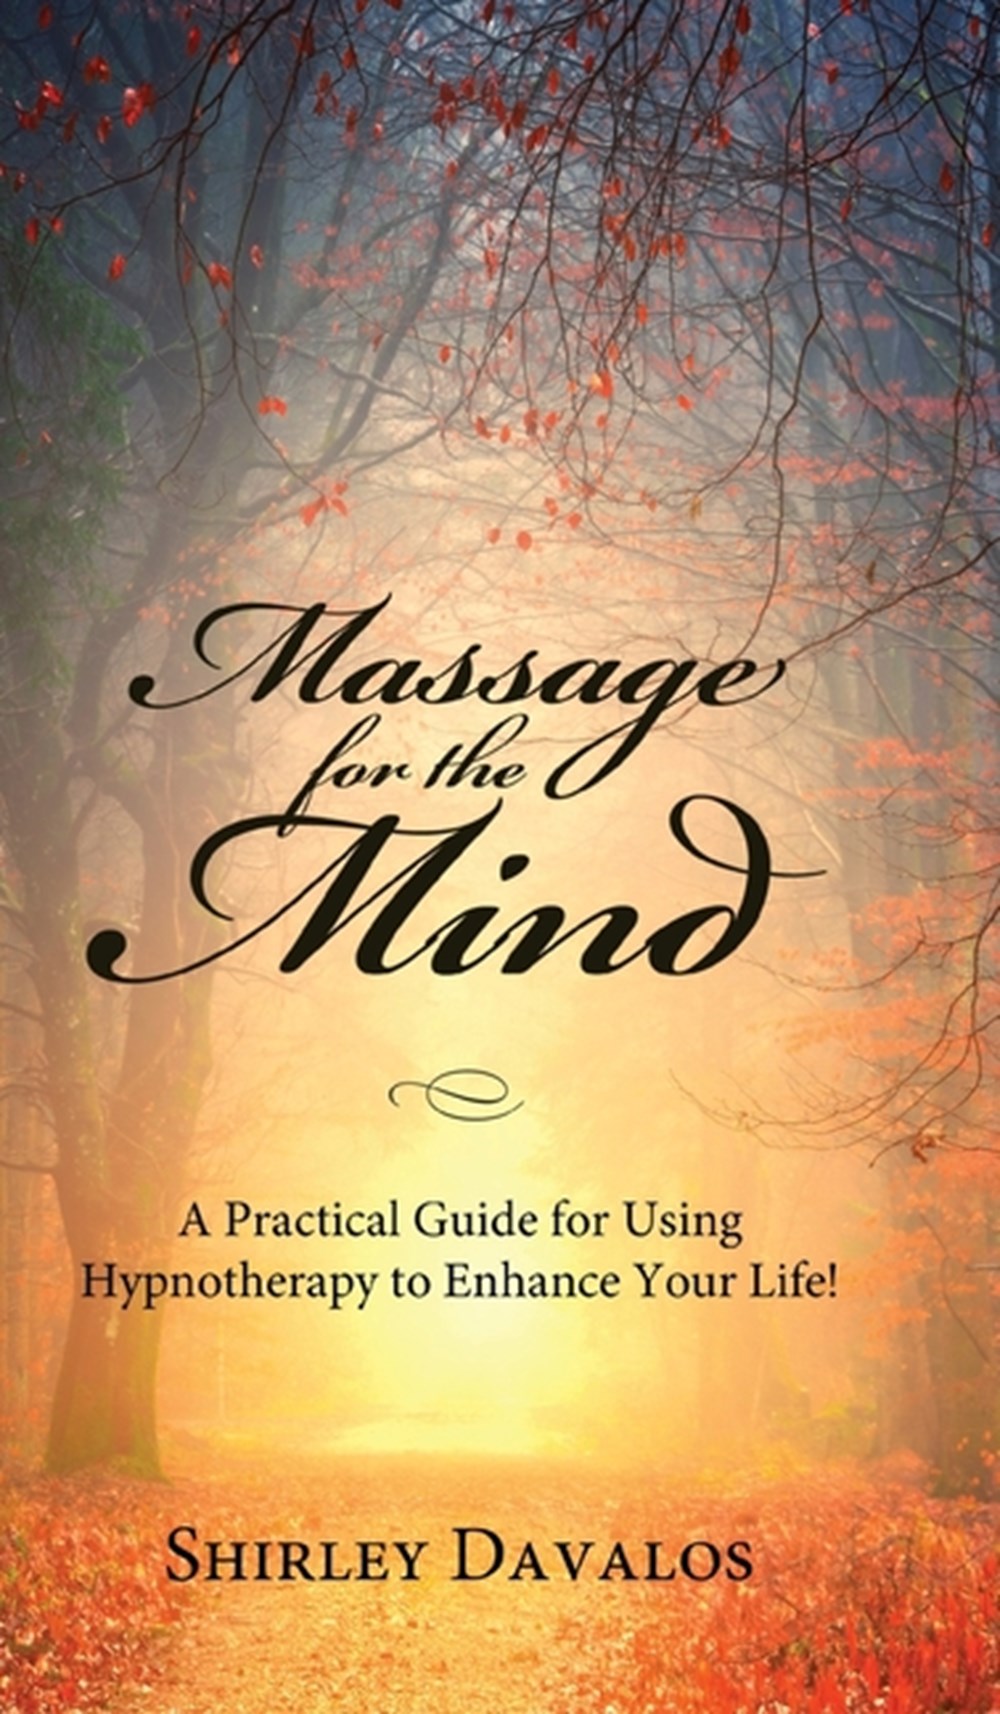 Massage for the Mind: A Practical Guide for Using Hypnotherapy to Enhance Your Life!